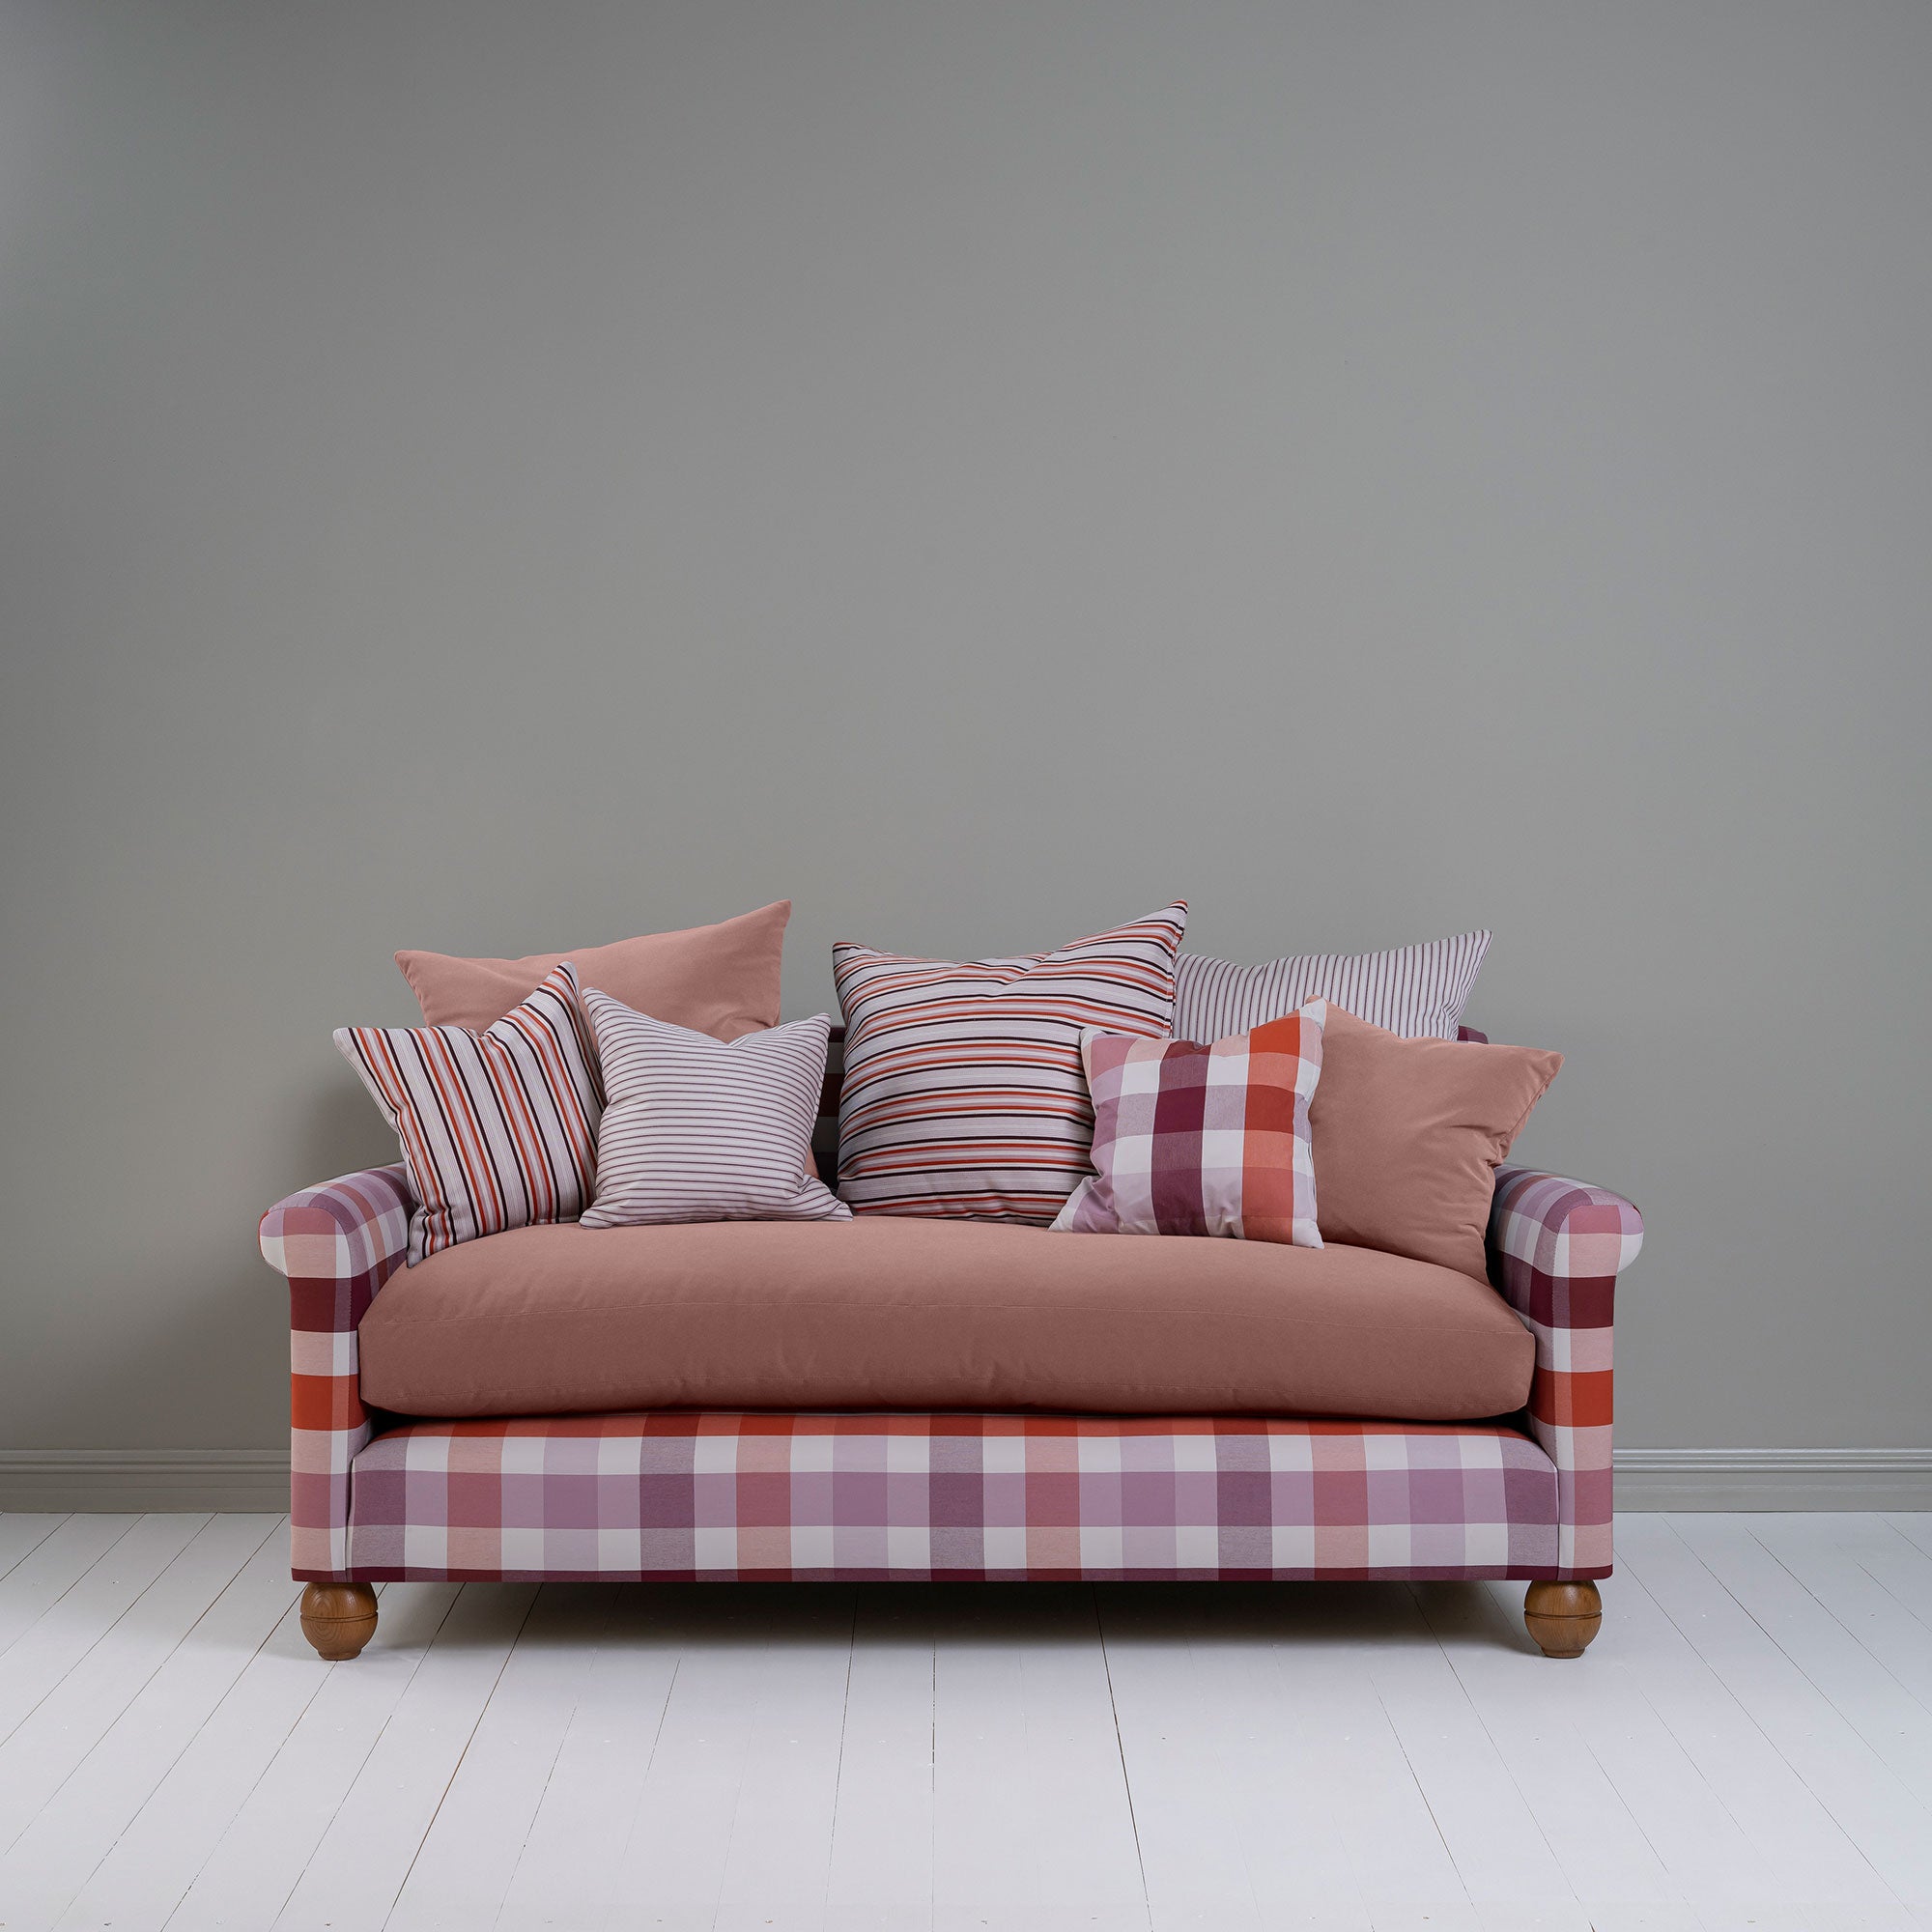  Idler 3 Seater Sofa in Checkmate Cotton Berry Frame and Intelligent Velvet Rose Seat 